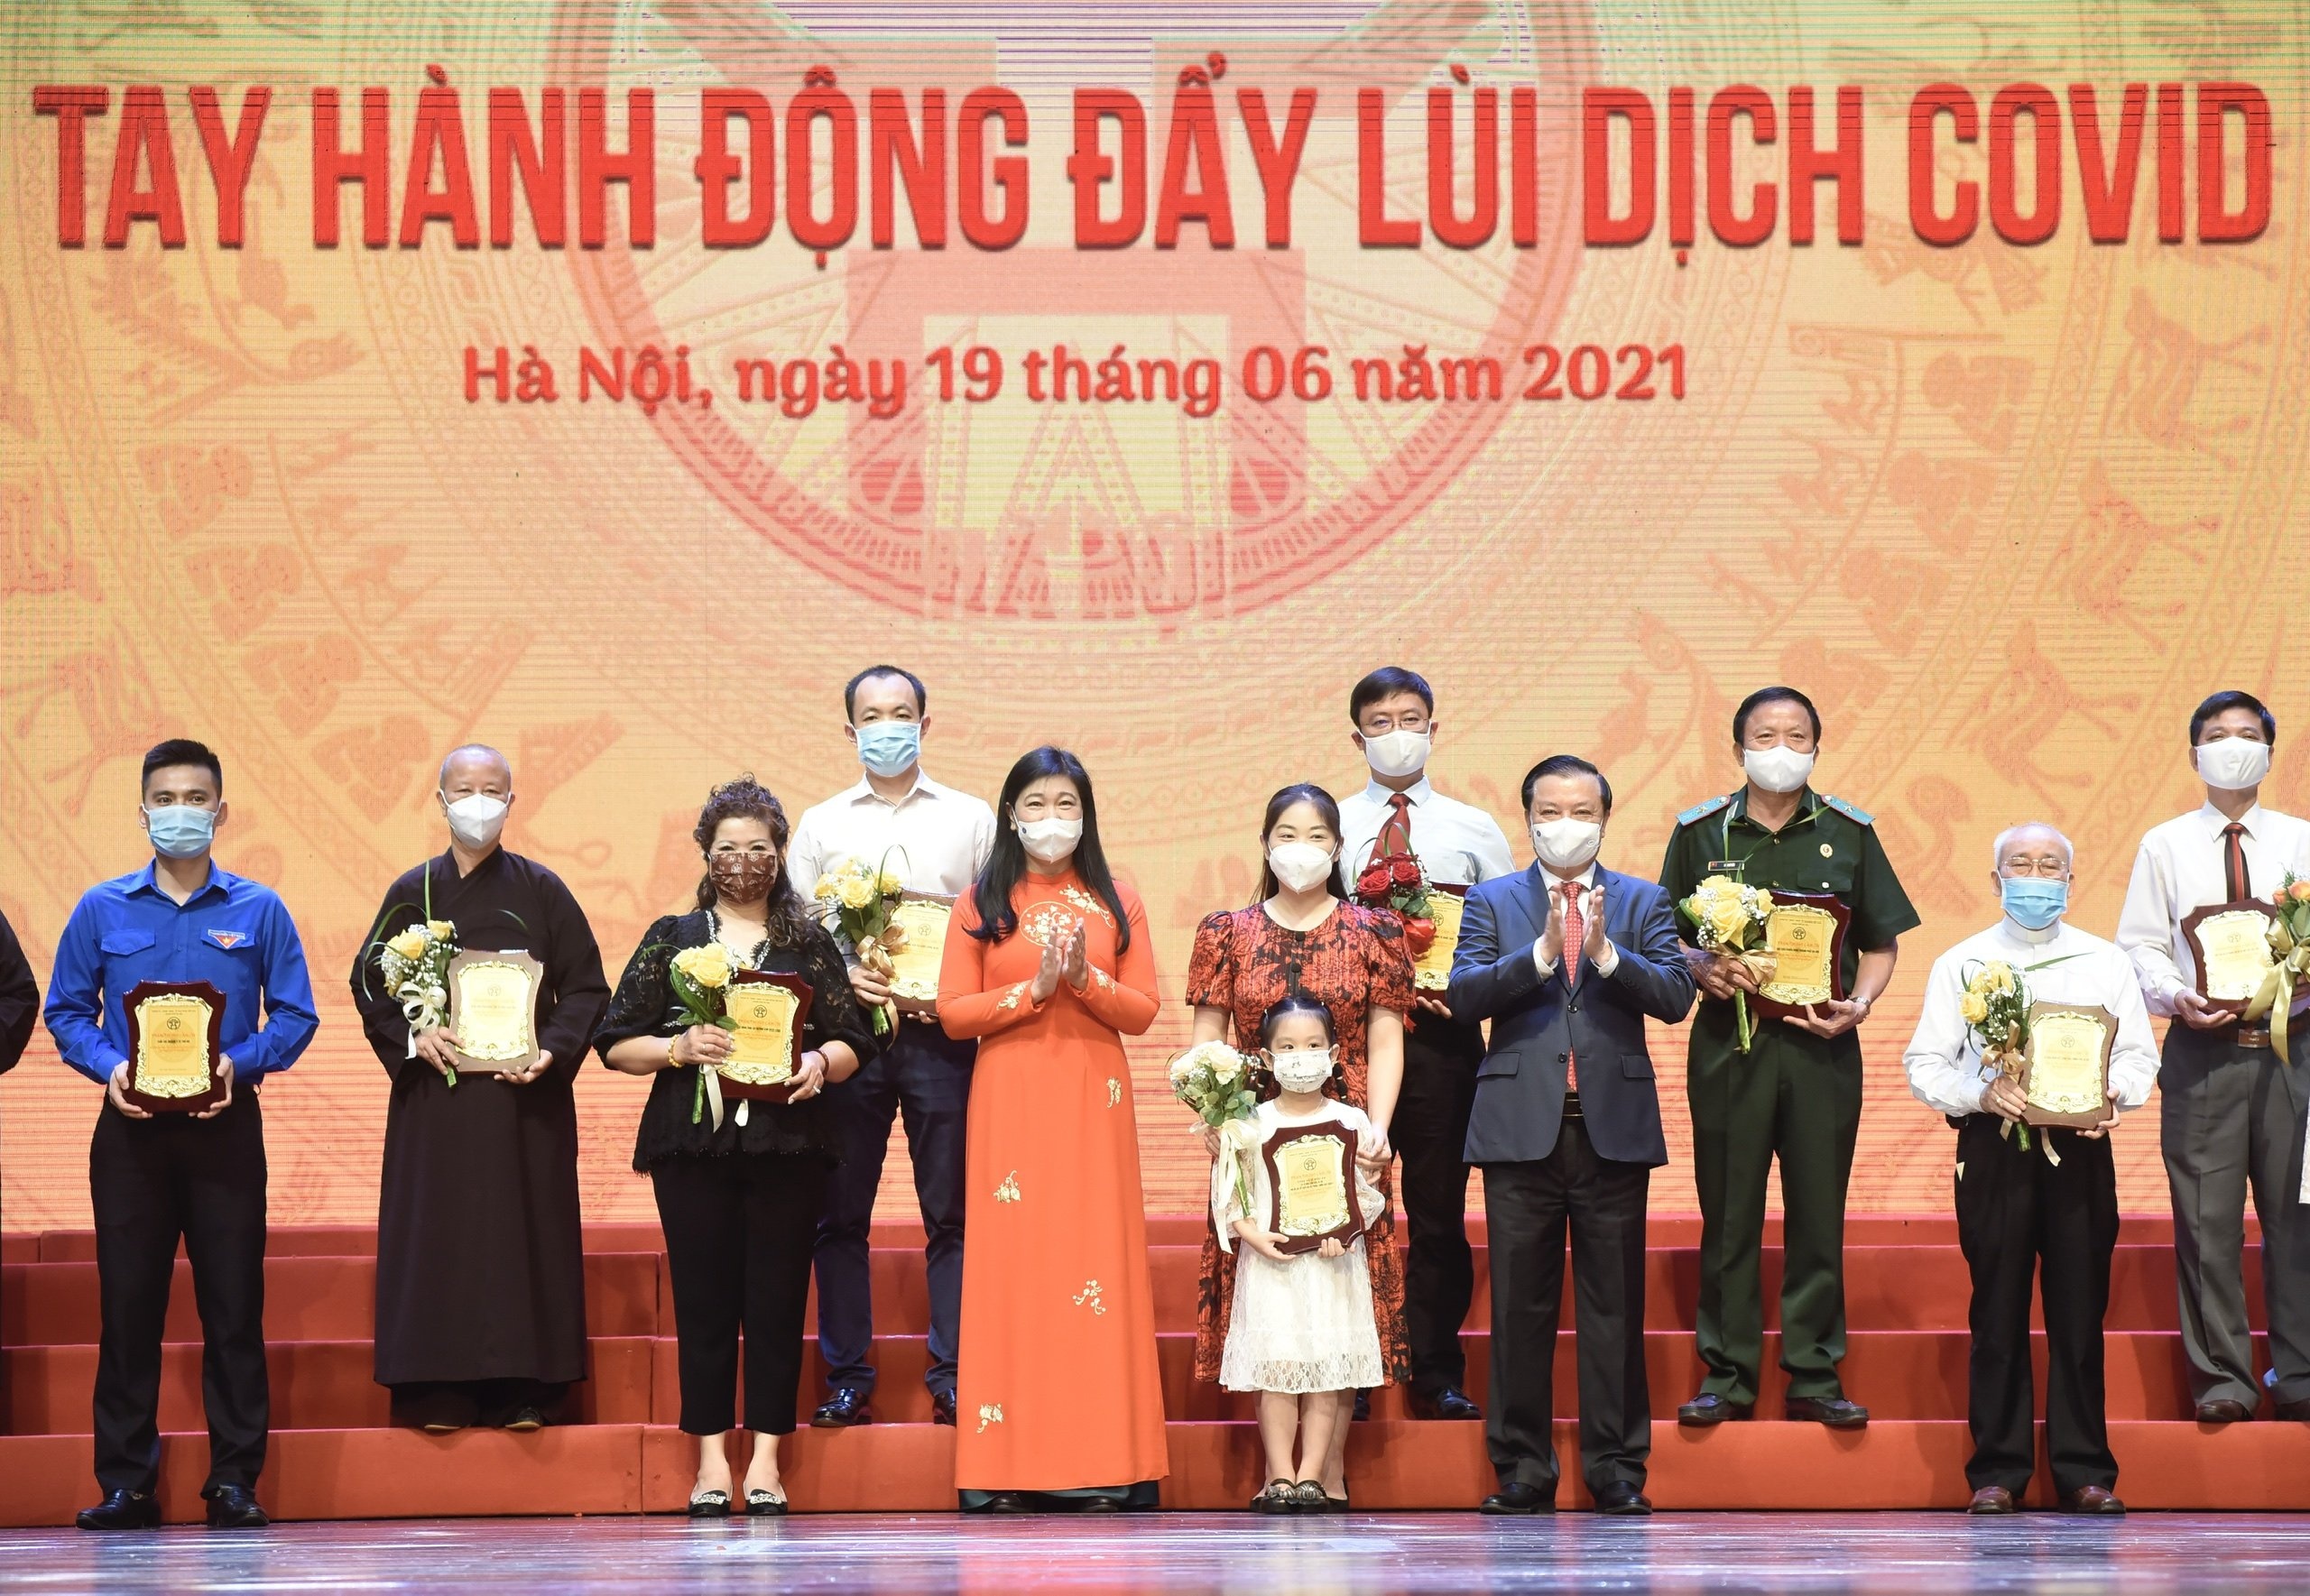 ha noi chung tay hanh dong day lui dich covid 19